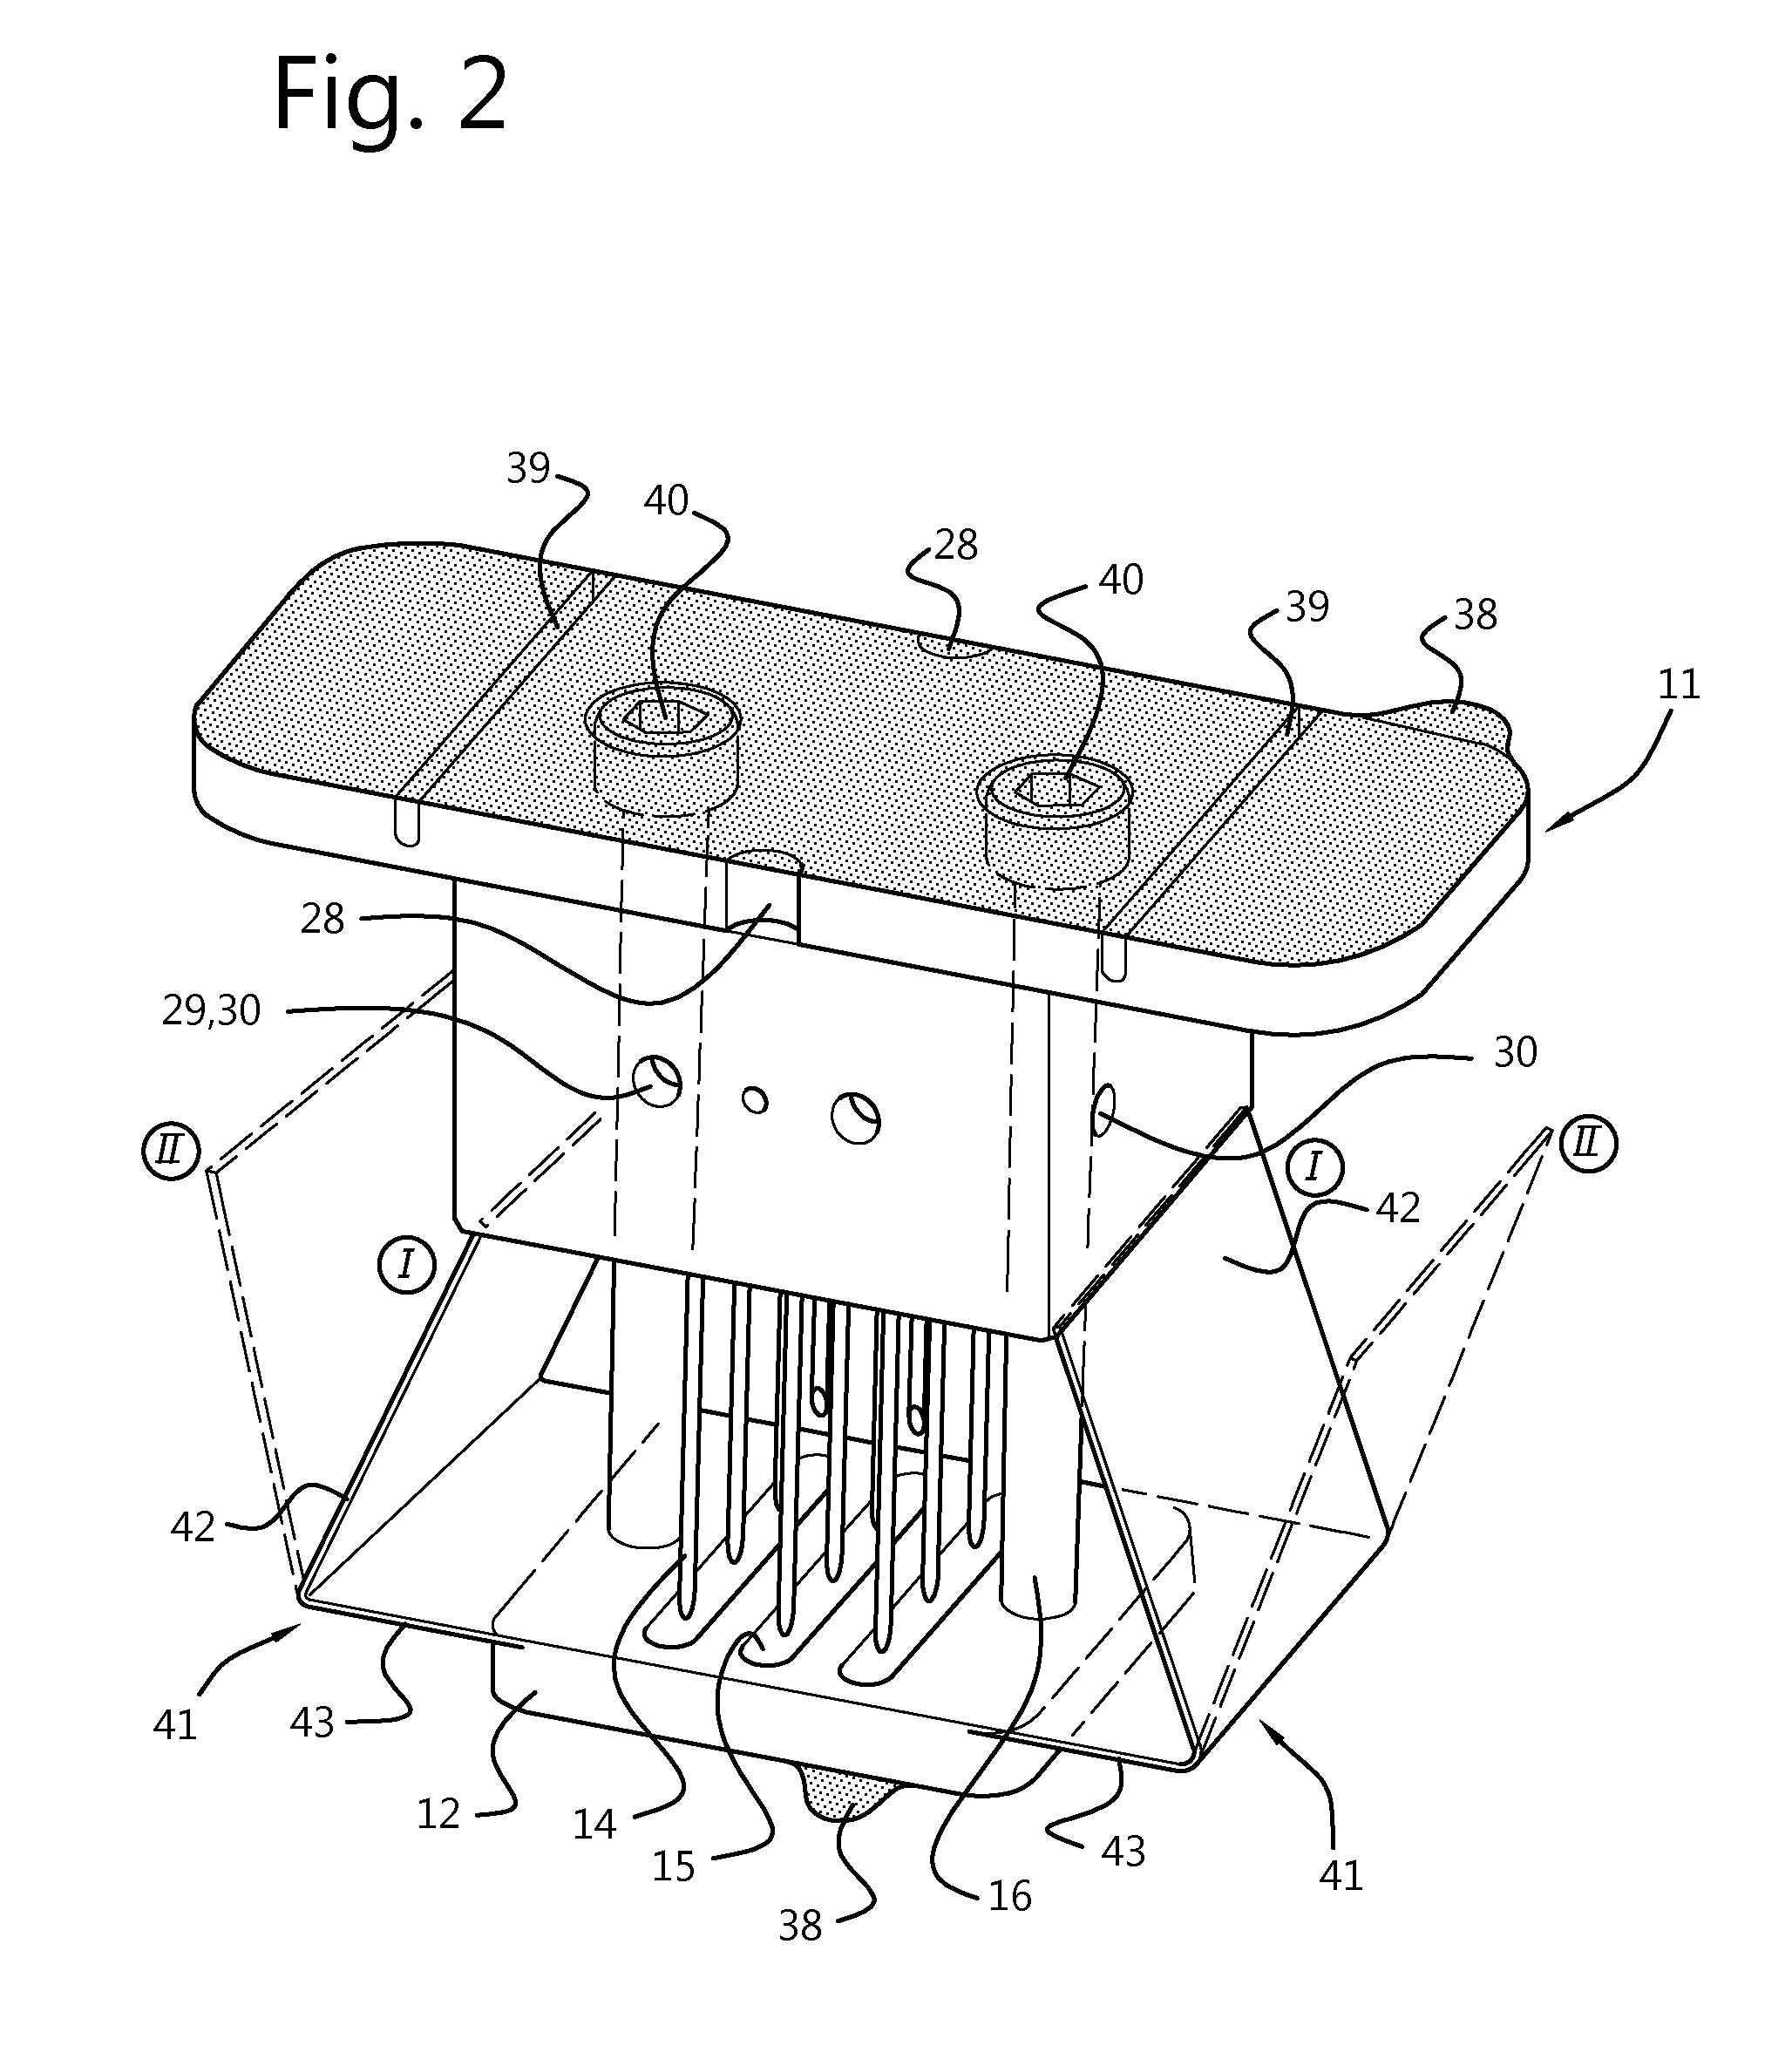 Apparatus for treating a tennis elbow by means of percutaneous intervention, as well as a holder for use with such an apparatus